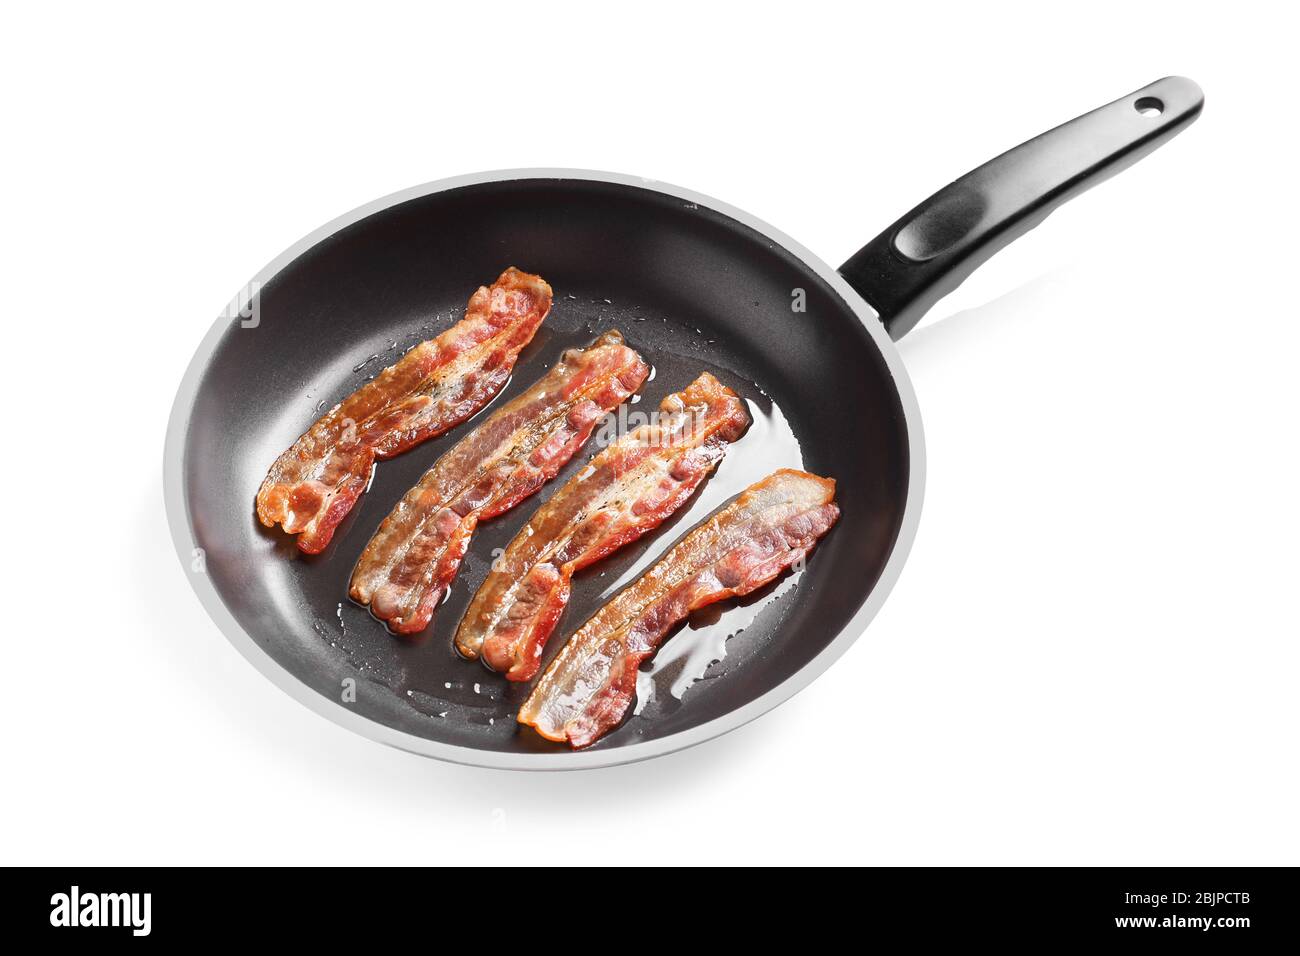 https://c8.alamy.com/comp/2BJPCTB/frying-pan-with-cooked-bacon-rashers-on-white-background-2BJPCTB.jpg